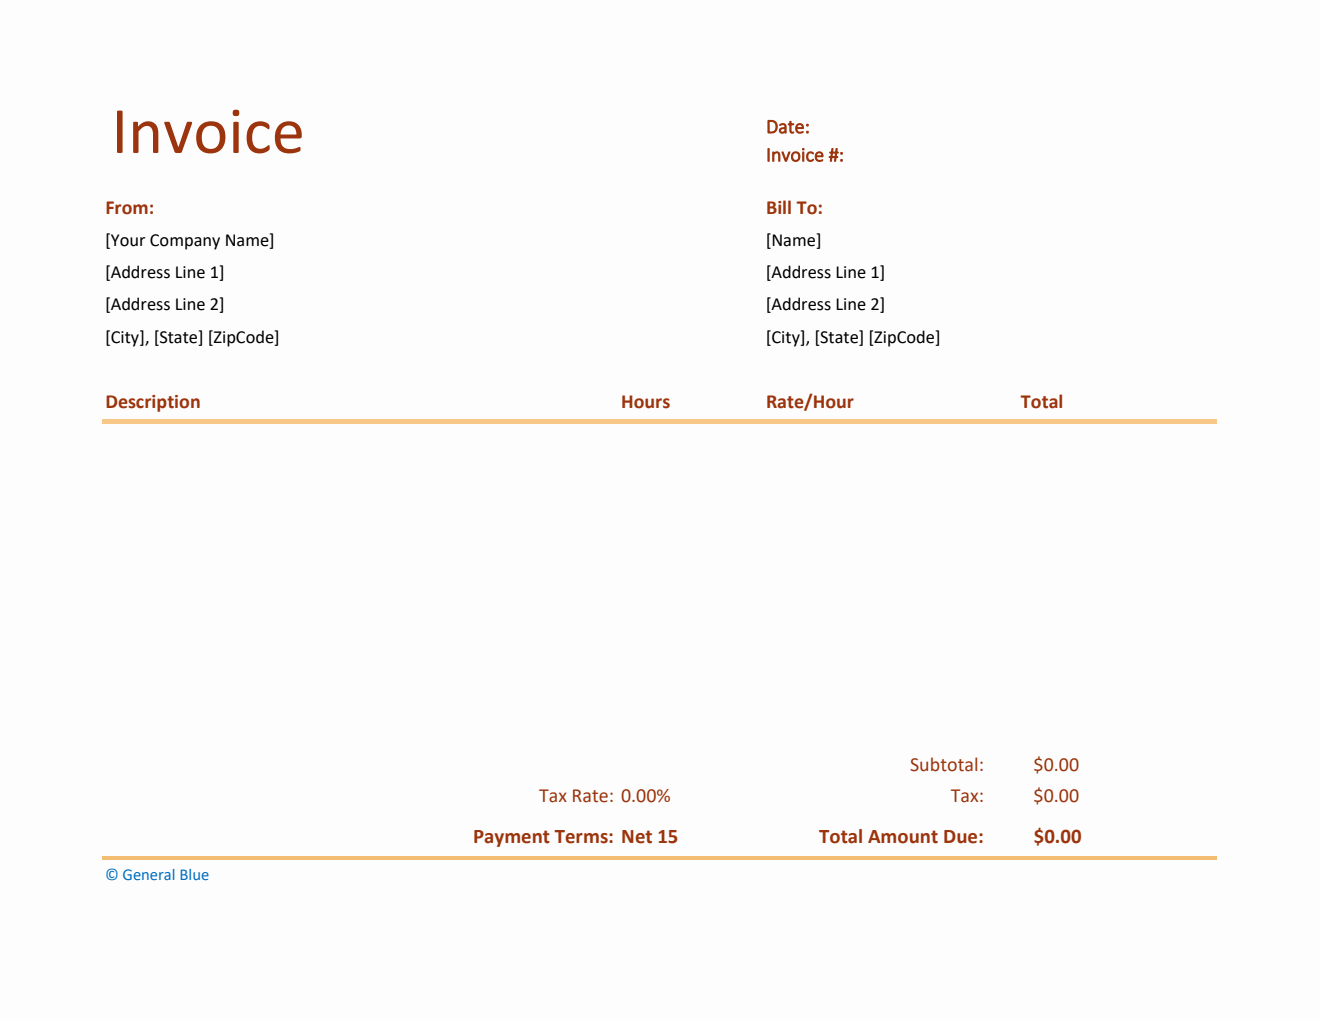 Excel Invoice Template for U.S. Freelancers With Tax calculation (Basic)